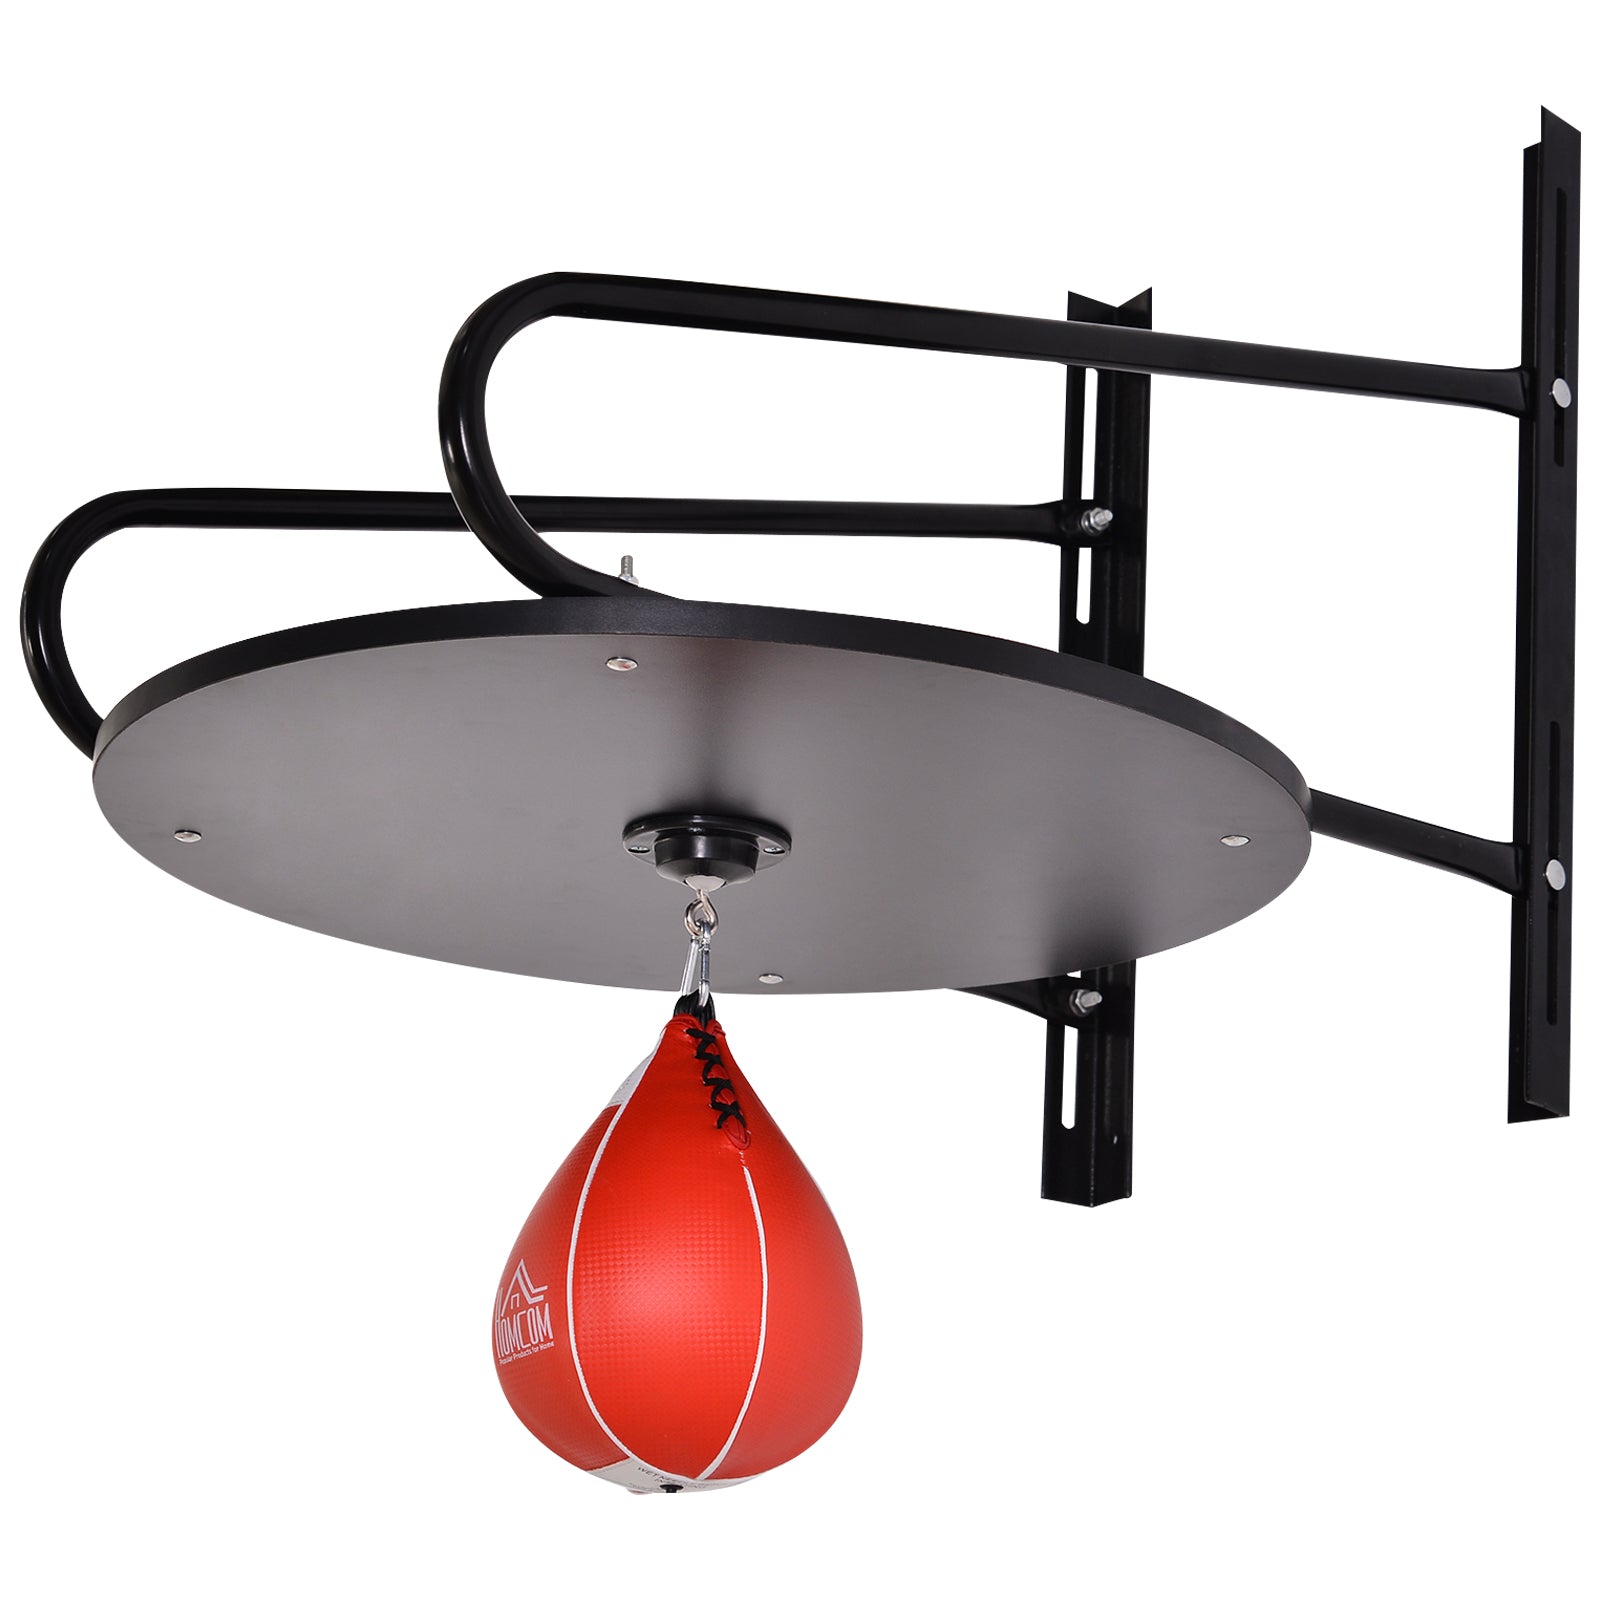 HOMCOM Pear Fast Boxing Set with Platform Wall Installation, Pump, Accessories Included, 60 x 73 x 80 cm - Inspirely